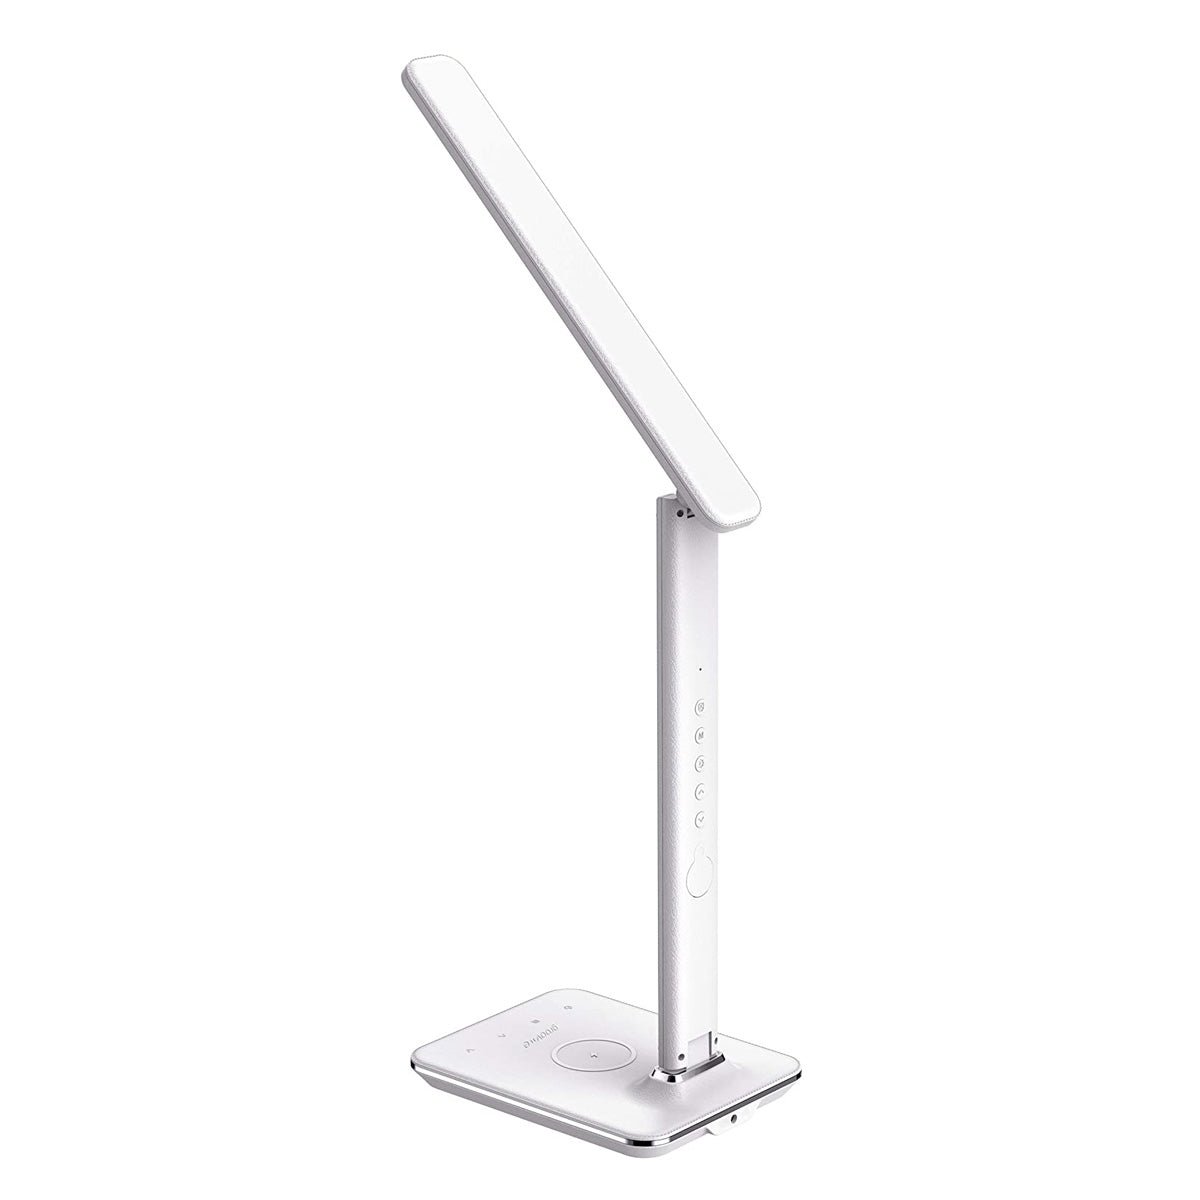 CRONY U13Q Table Lamp with wirelese charge-night light Clock LED Desk Lamp with Built-in Wireless Charger & Alarm Clock - Edragonmall.com